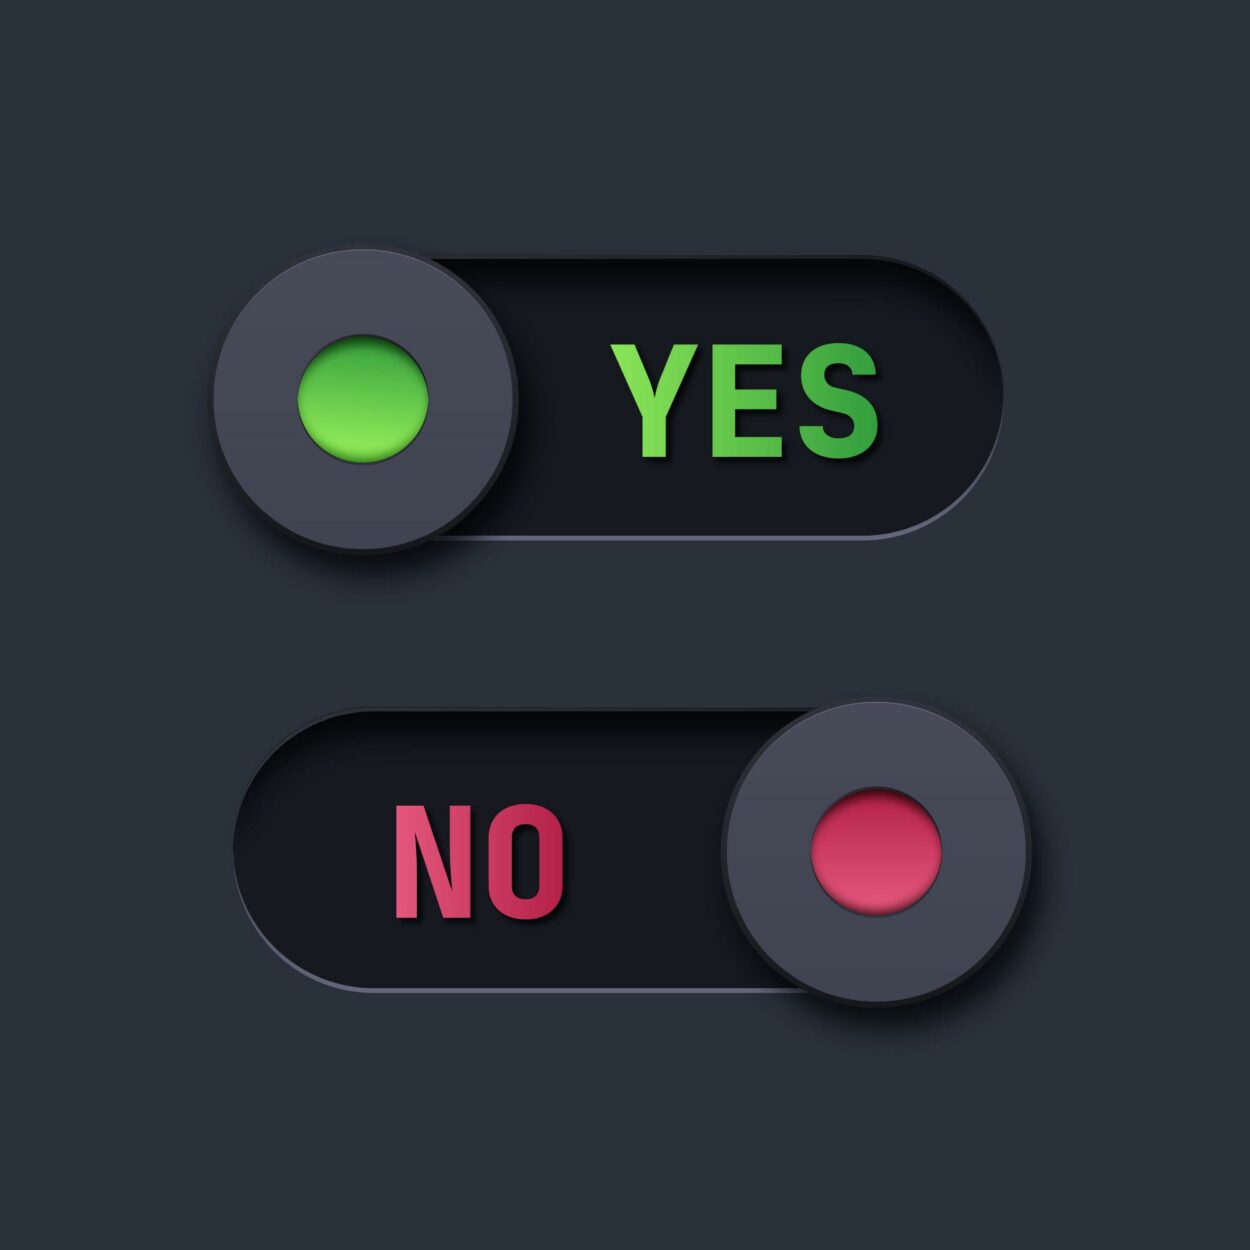 Yes: toggle towards the right & No: toggle towards the left